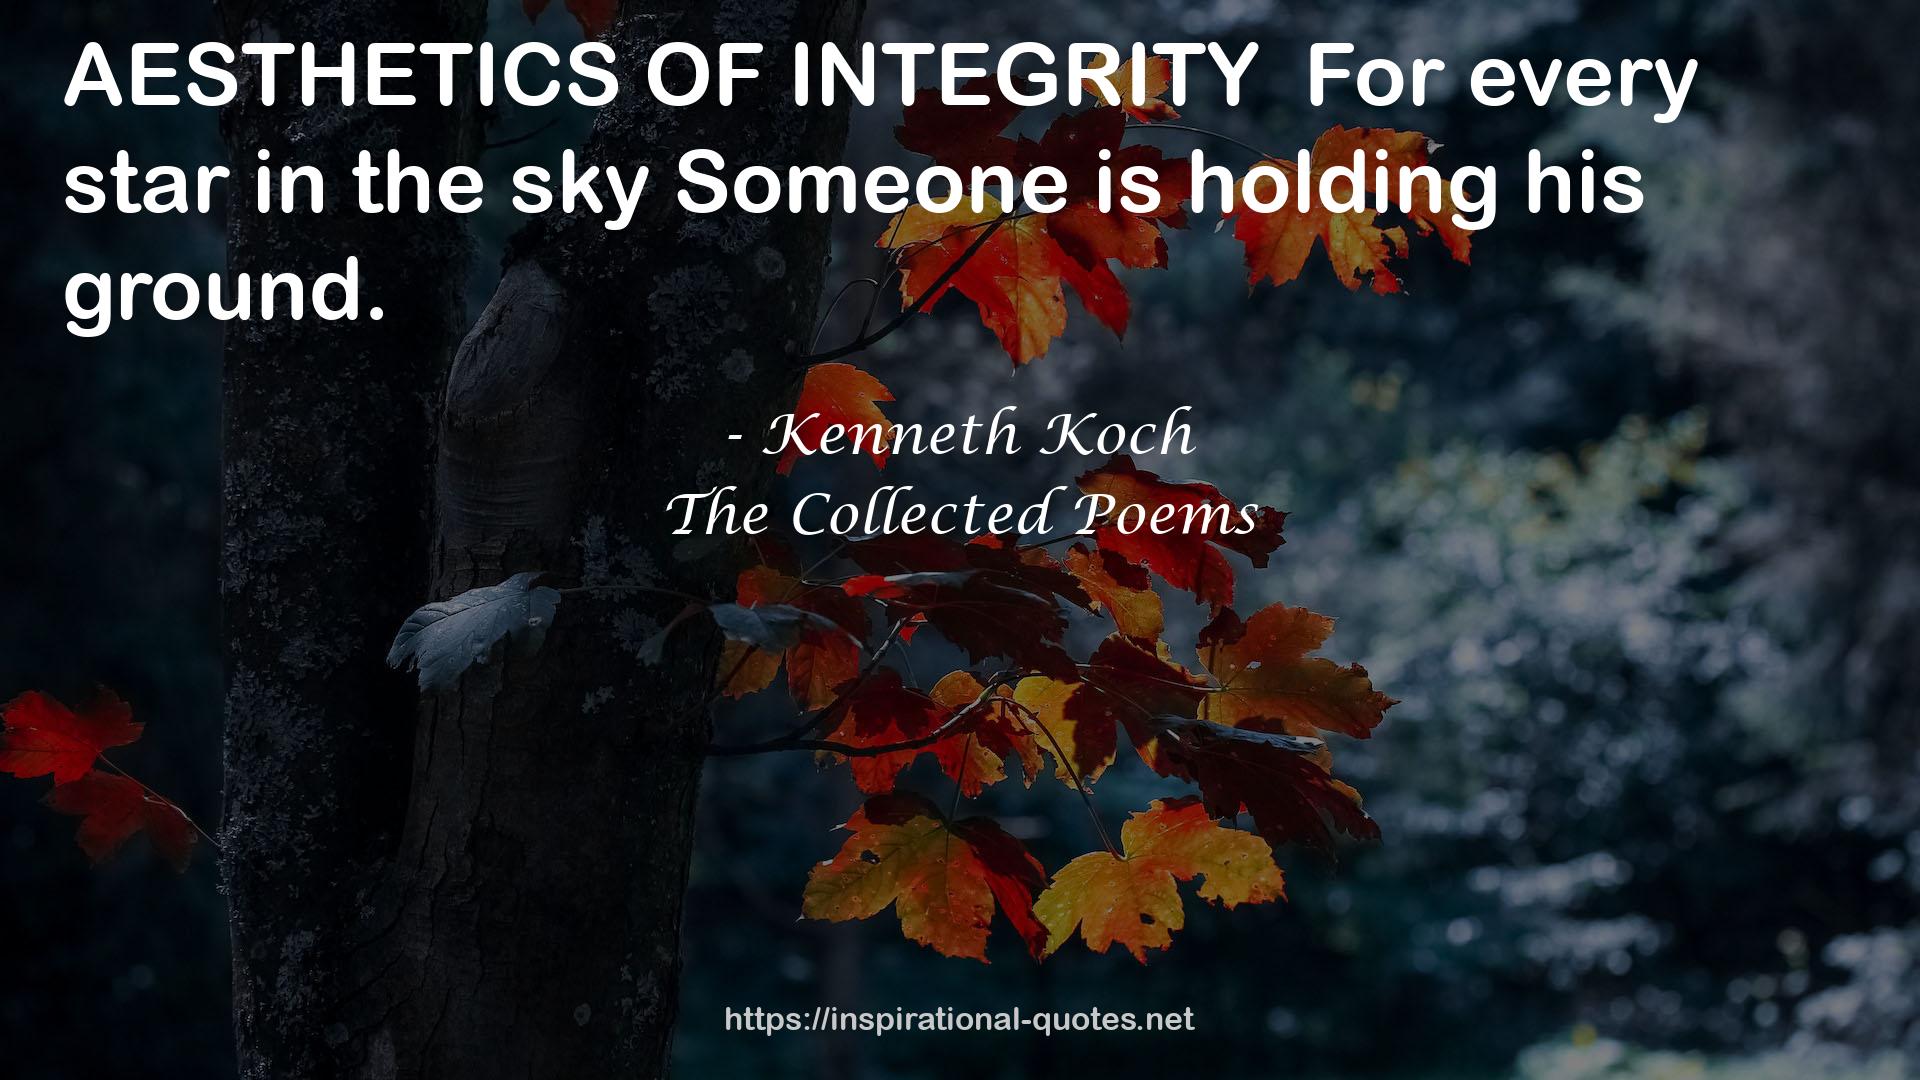 Kenneth Koch QUOTES